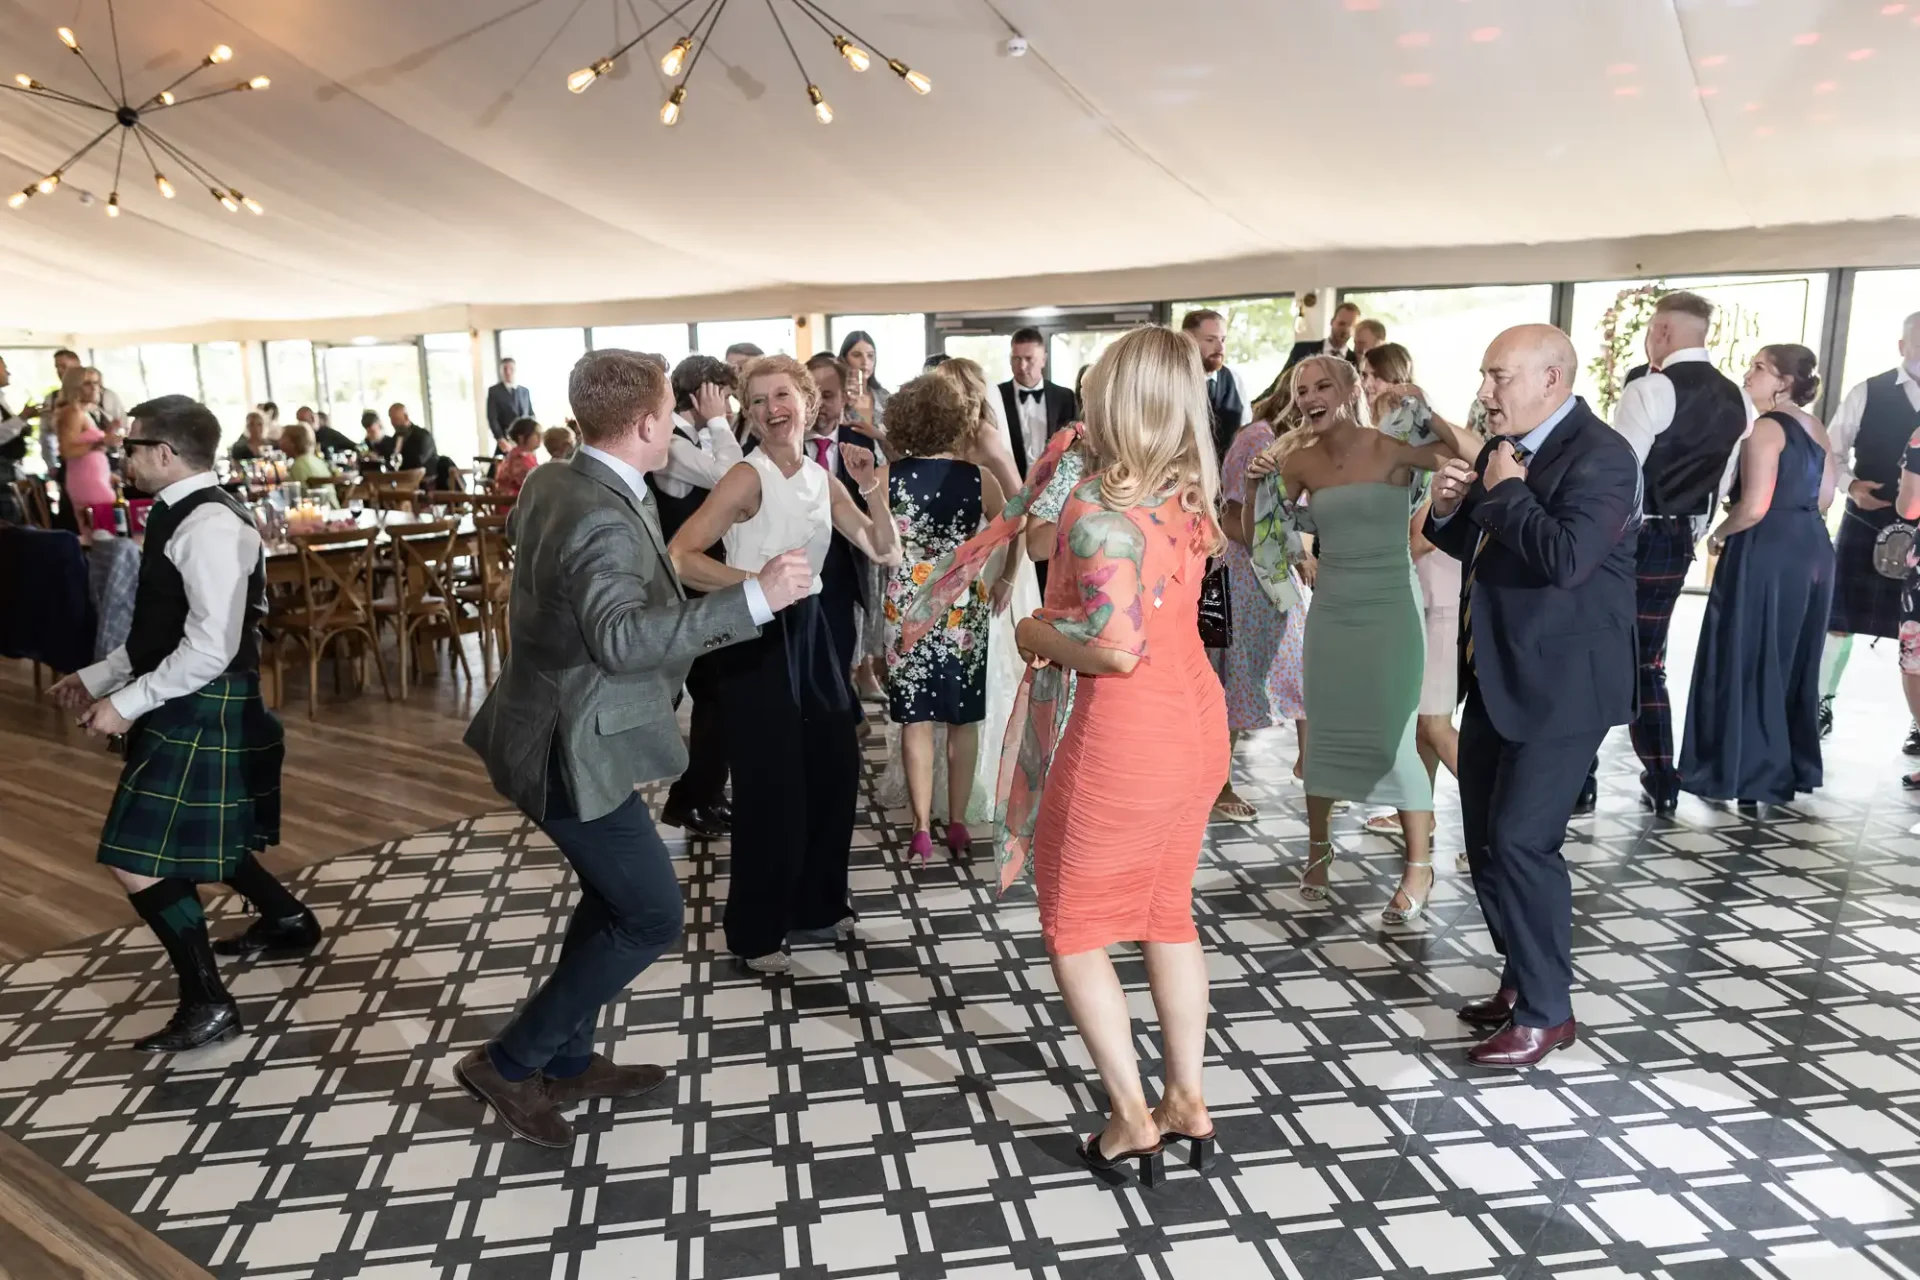 Guests dancing joyfully at a wedding reception under a tent with a black and white checkered dance floor.